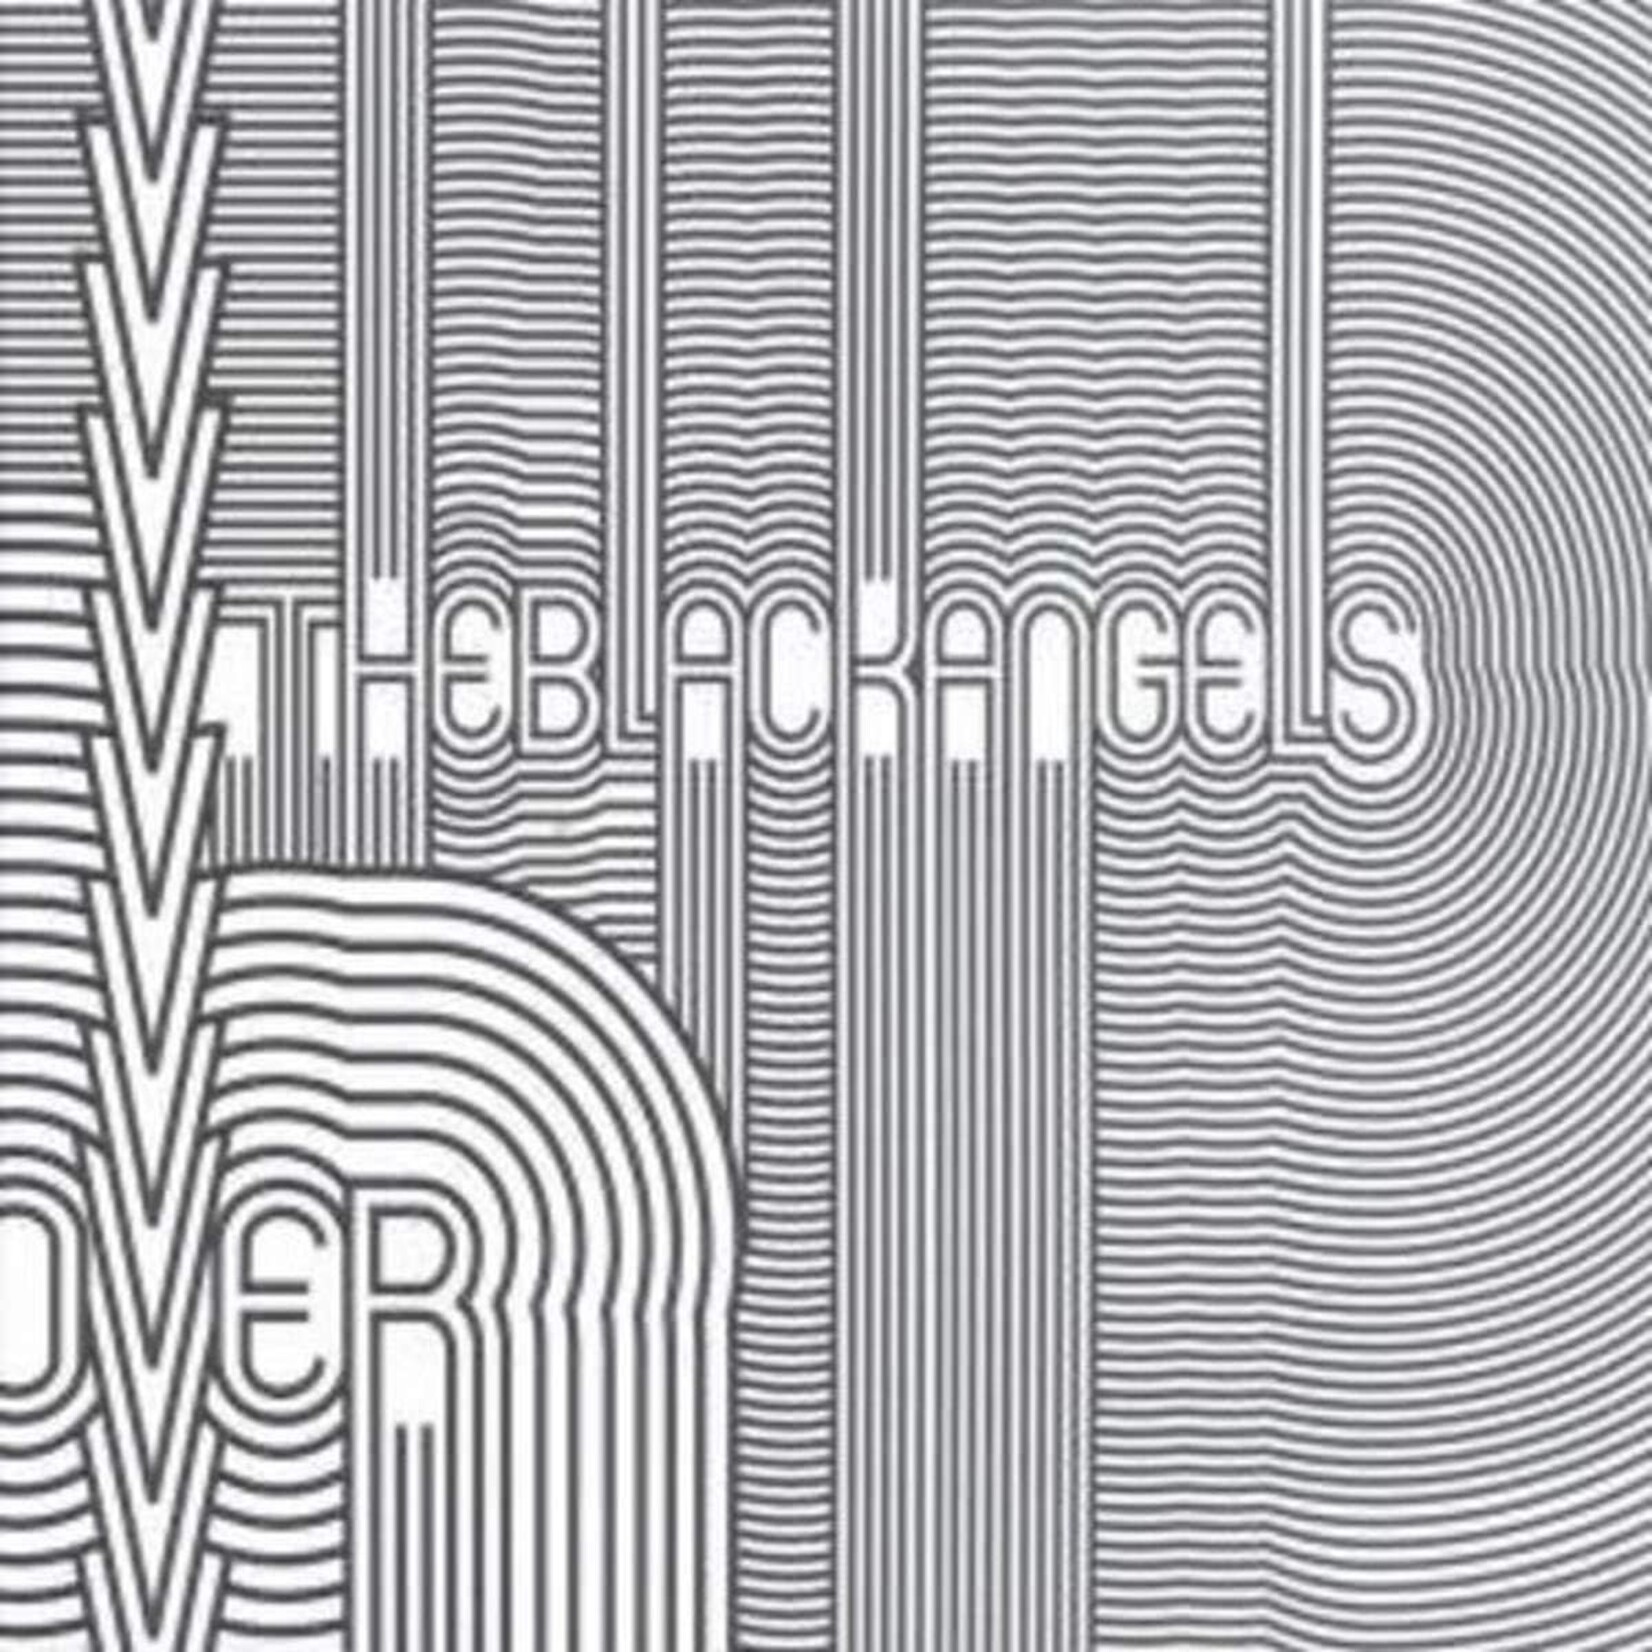 The Black Angels - Passover (nm) near mint